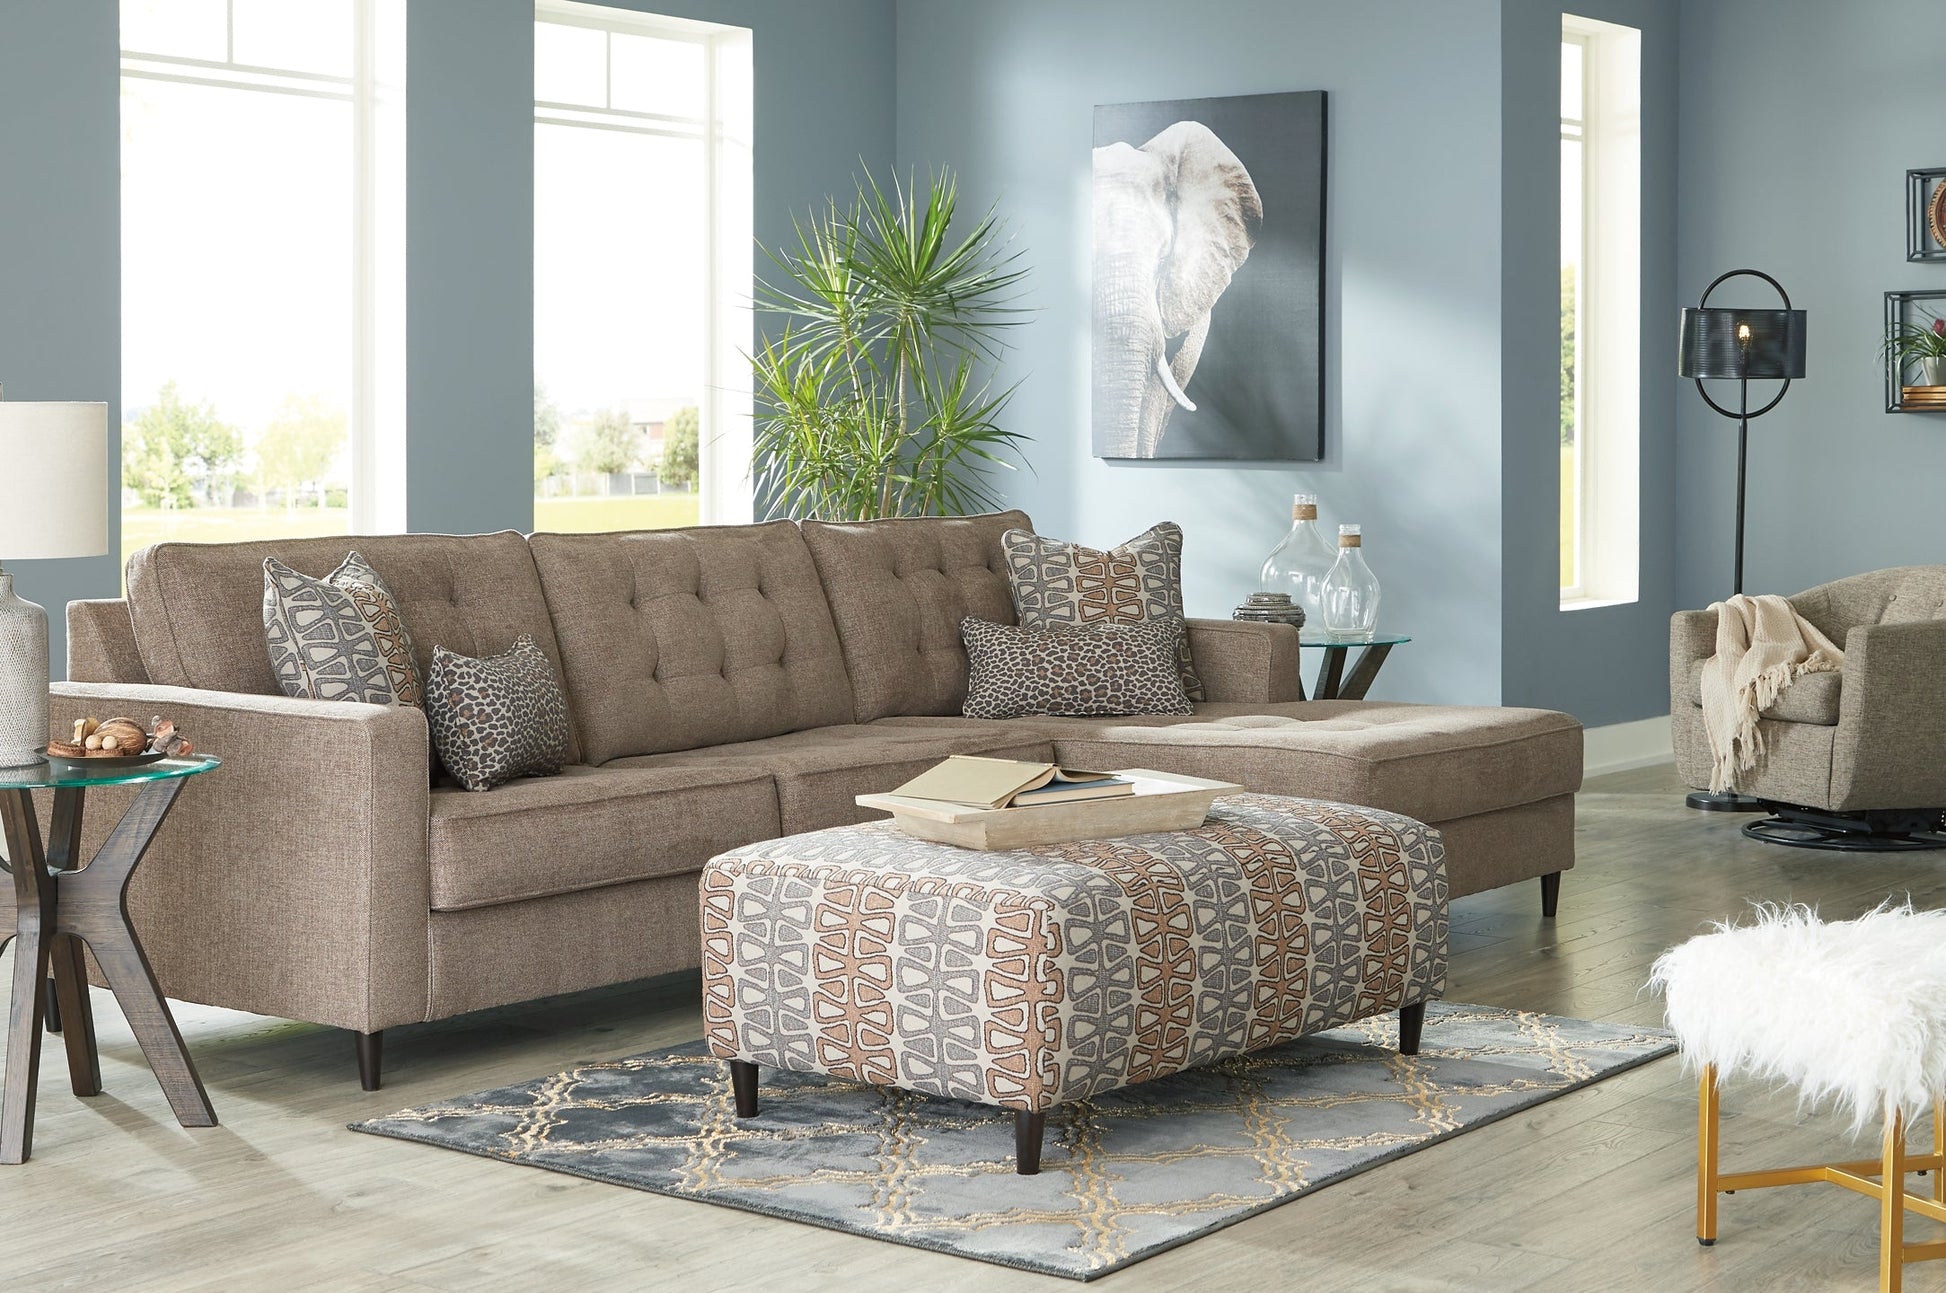 Flintshire Oversized Accent Ottoman Rent Wise Rent To Own Jacksonville, Florida